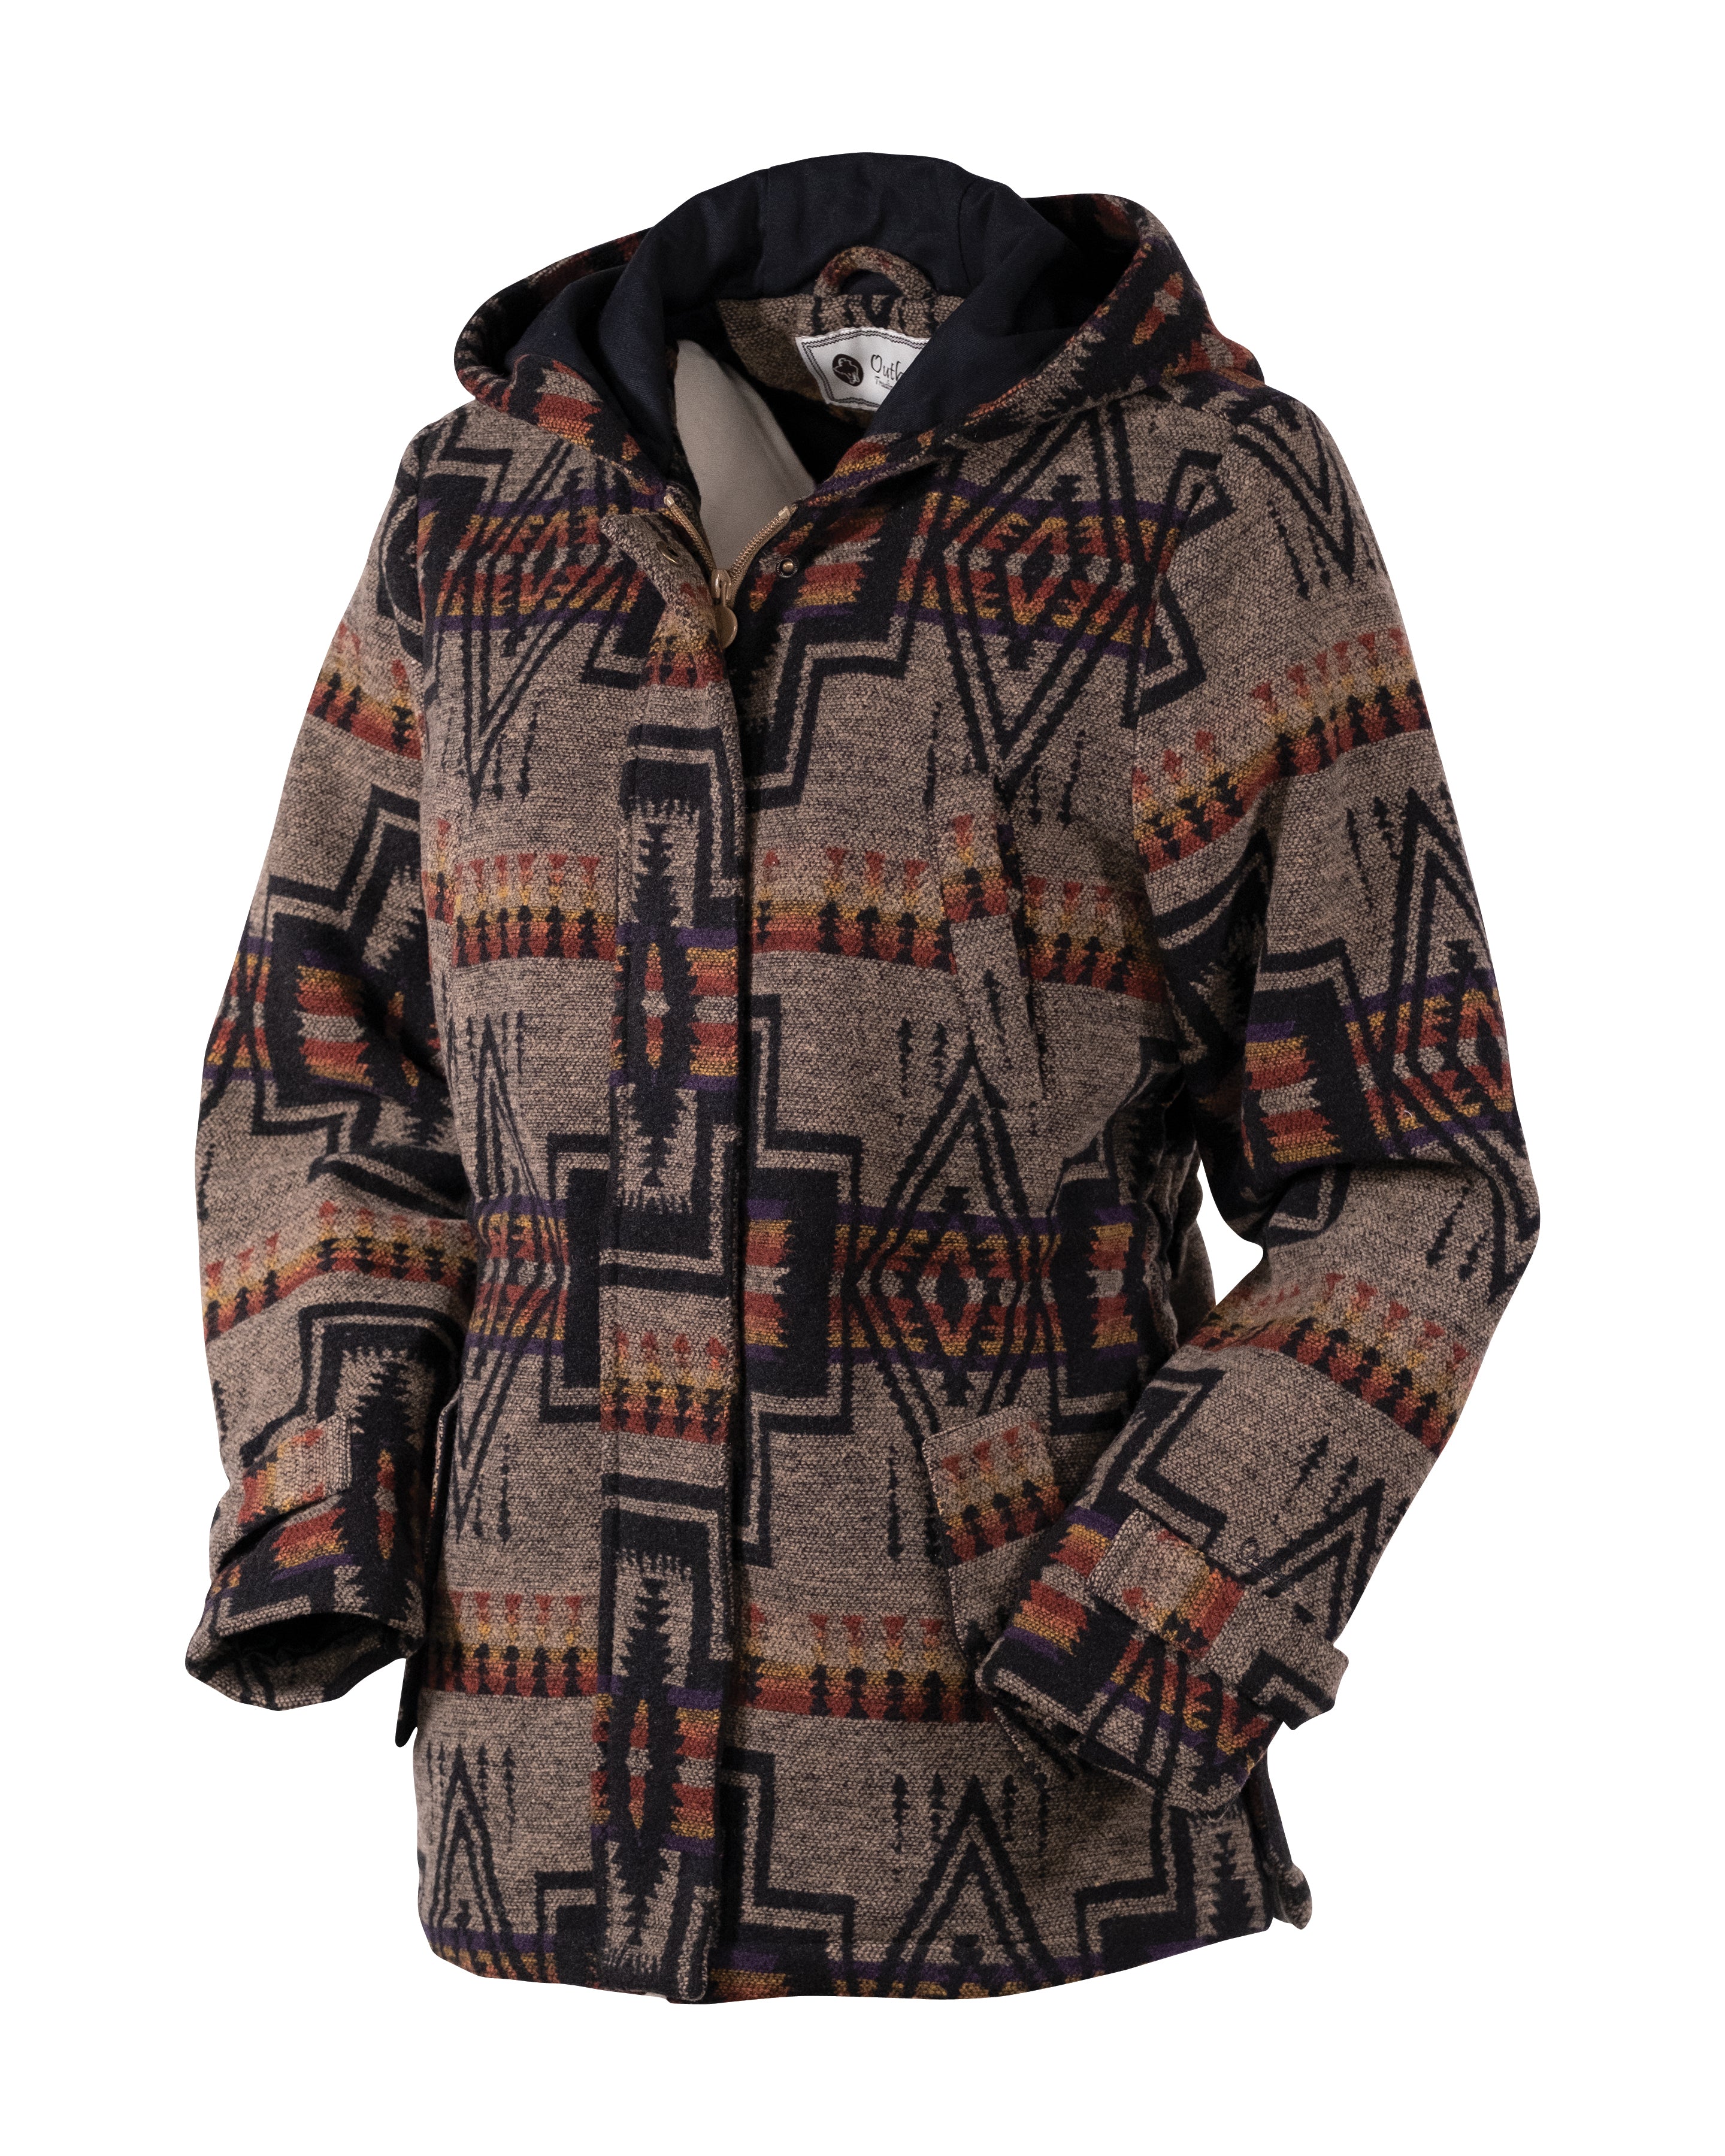 Outback Traders Myra Jacket